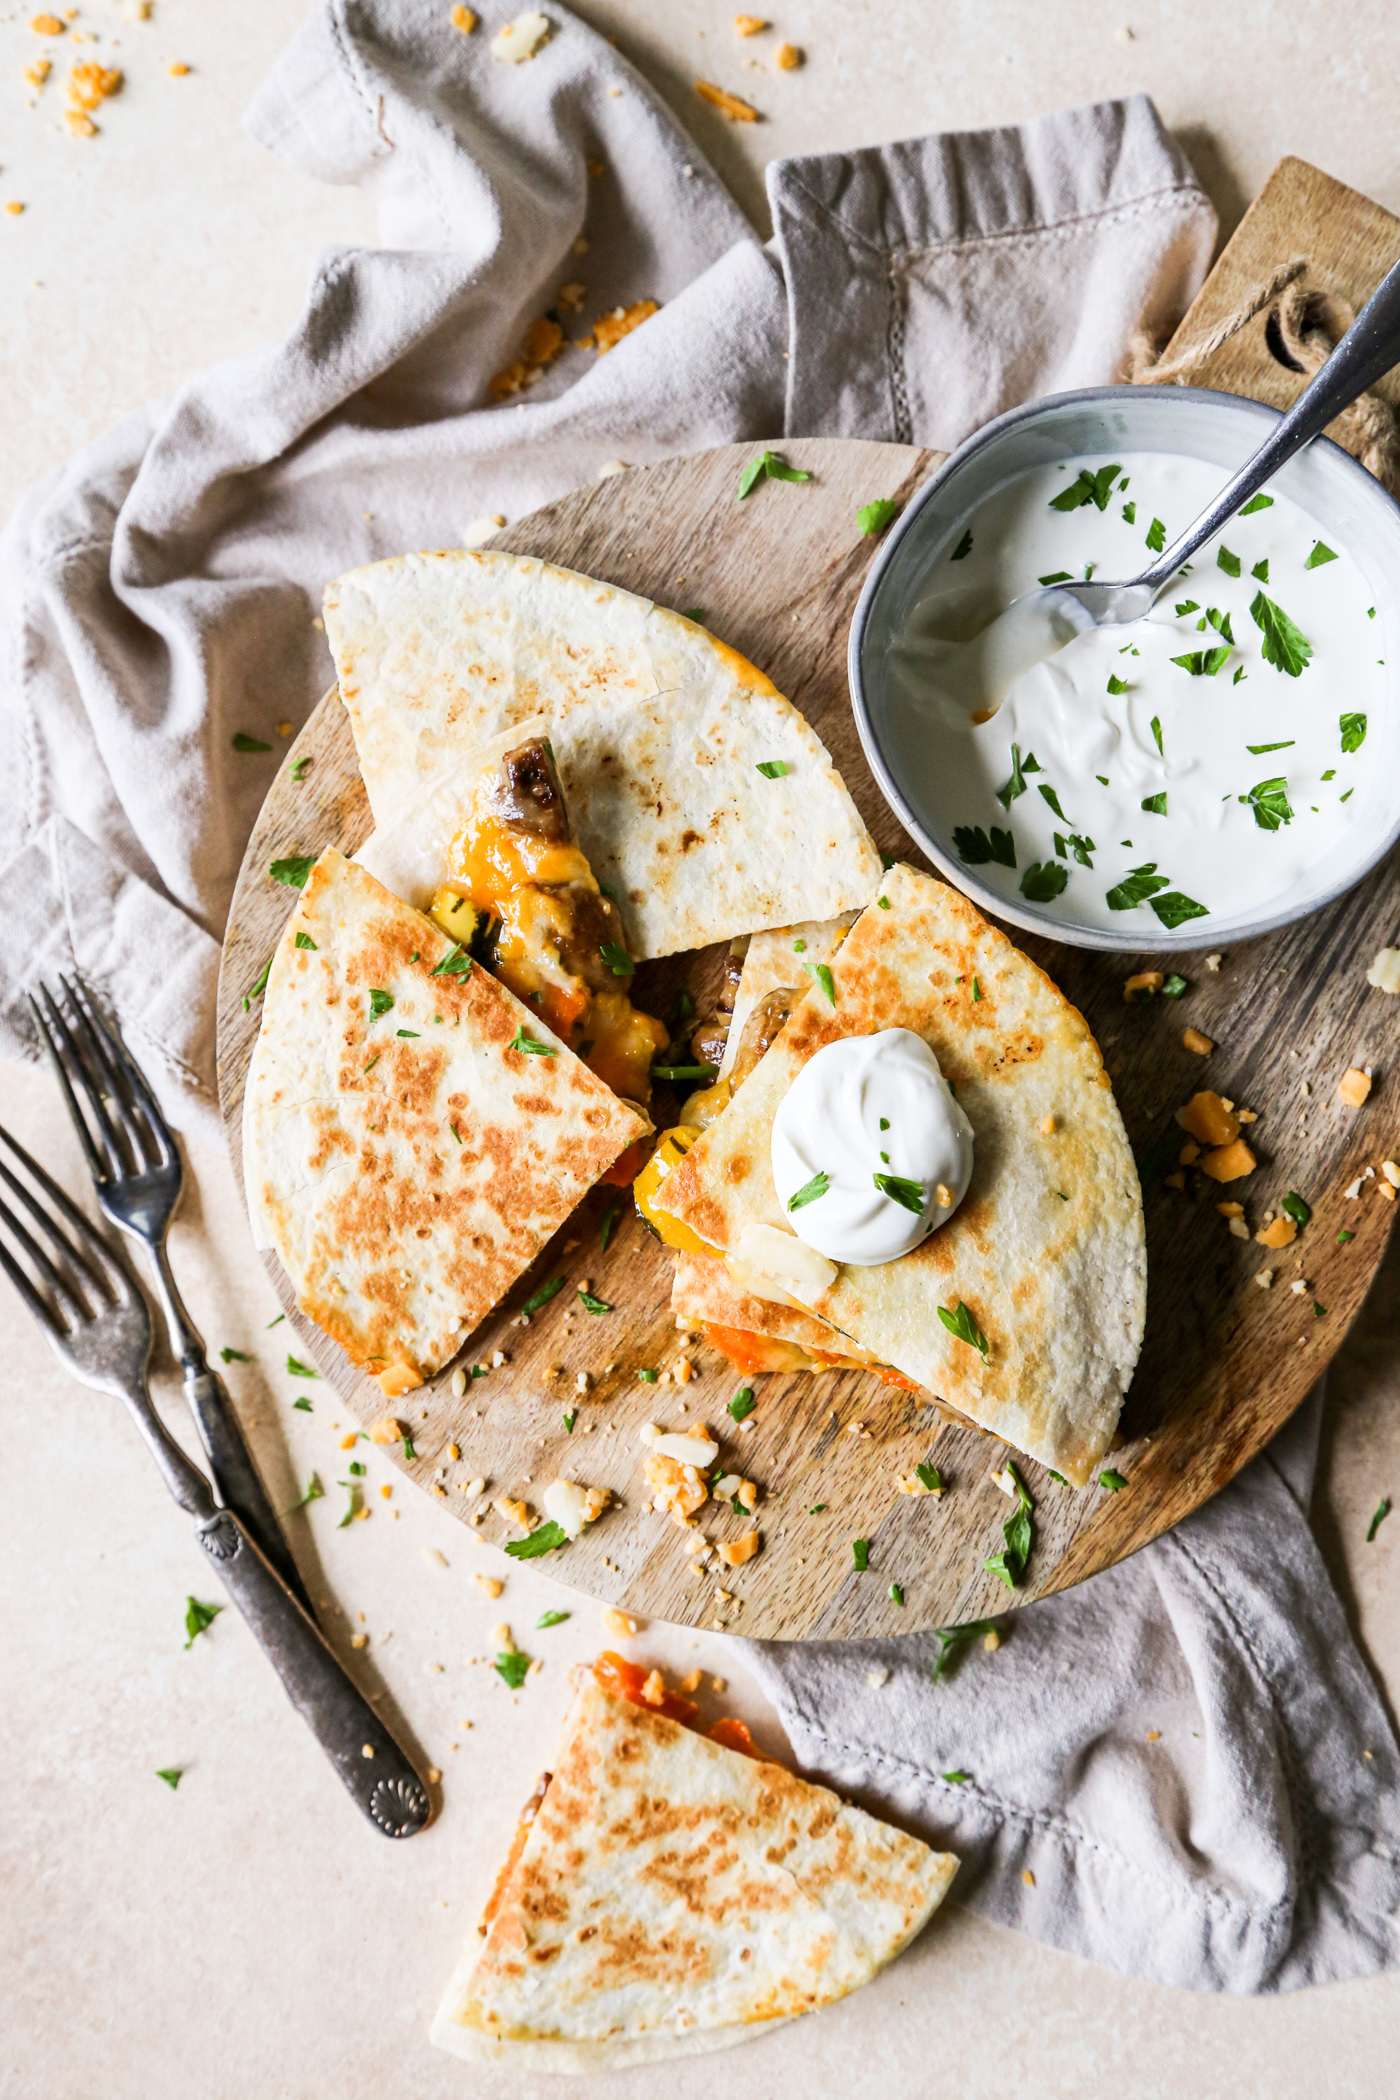 Steak Mushroom and Squash Quesadilla is a luxury leftover dream recipe on a wood cutting board next to a bowl of sour cream